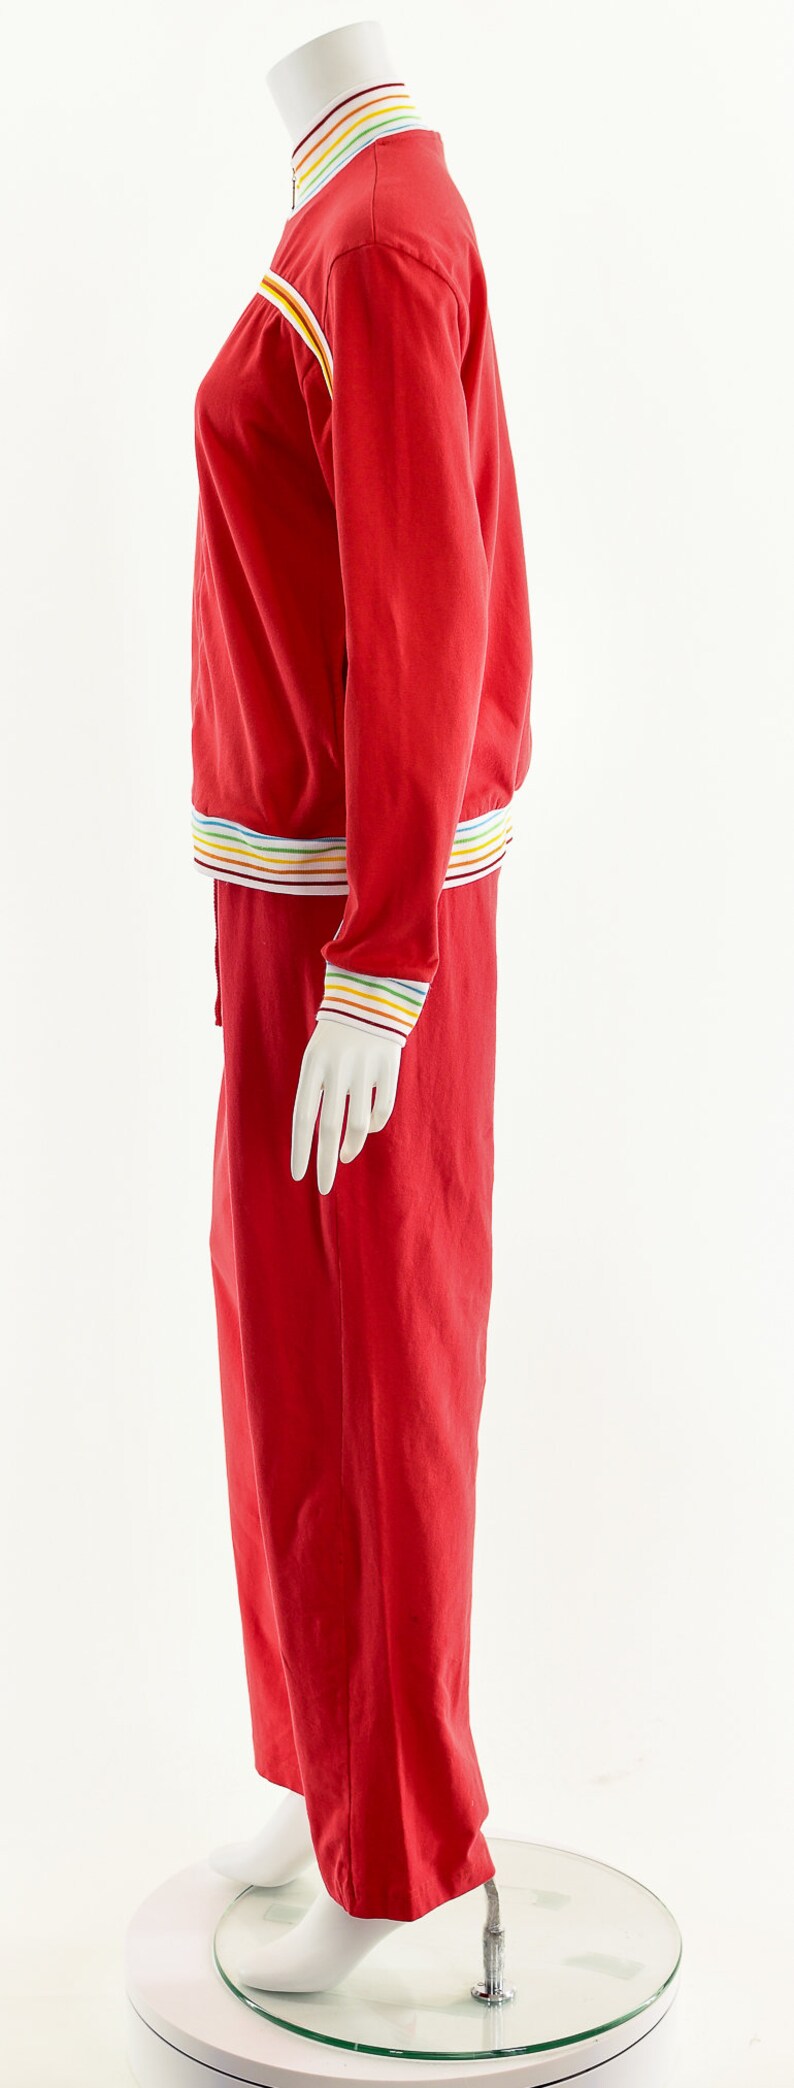 Red Rainbow Track Suit,Vintage Rainbow Jumpsuit,70s Inspired Two Piece,Juicy Couture Inspired,Juicy Couture Track Suit,Vintage Loungewear image 9